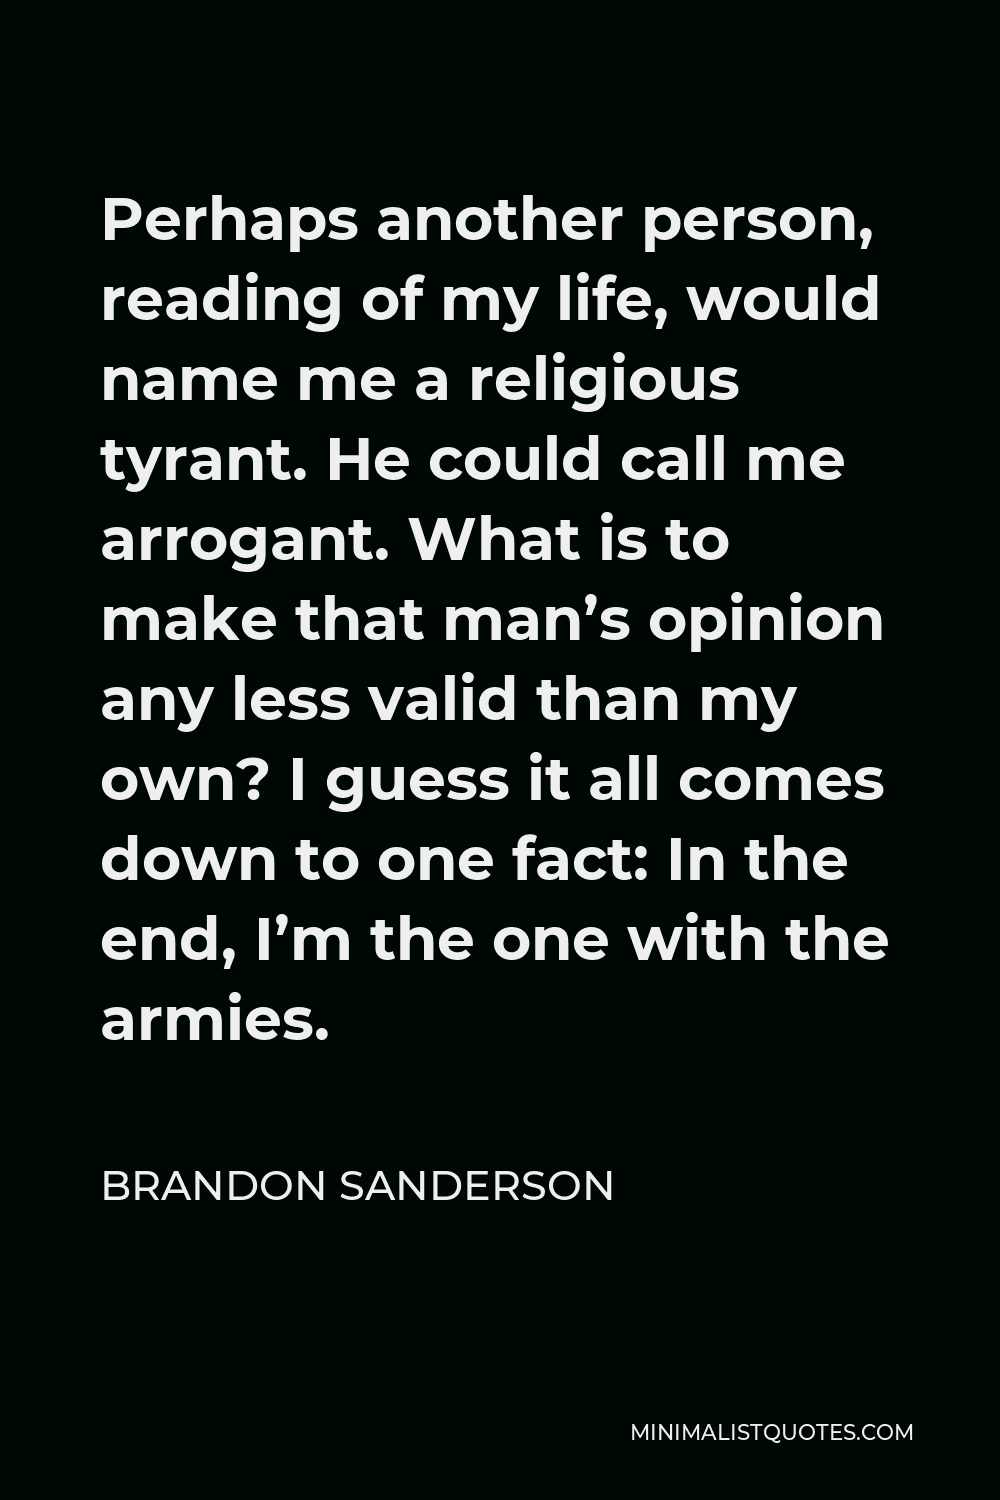 Brandon Sanderson Quote - Perhaps another person, reading of my life, would name me a religious tyrant. He could call me arrogant. What is to make that man’s opinion any less valid than my own? I guess it all comes down to one fact: In the end, I’m the one with the armies.